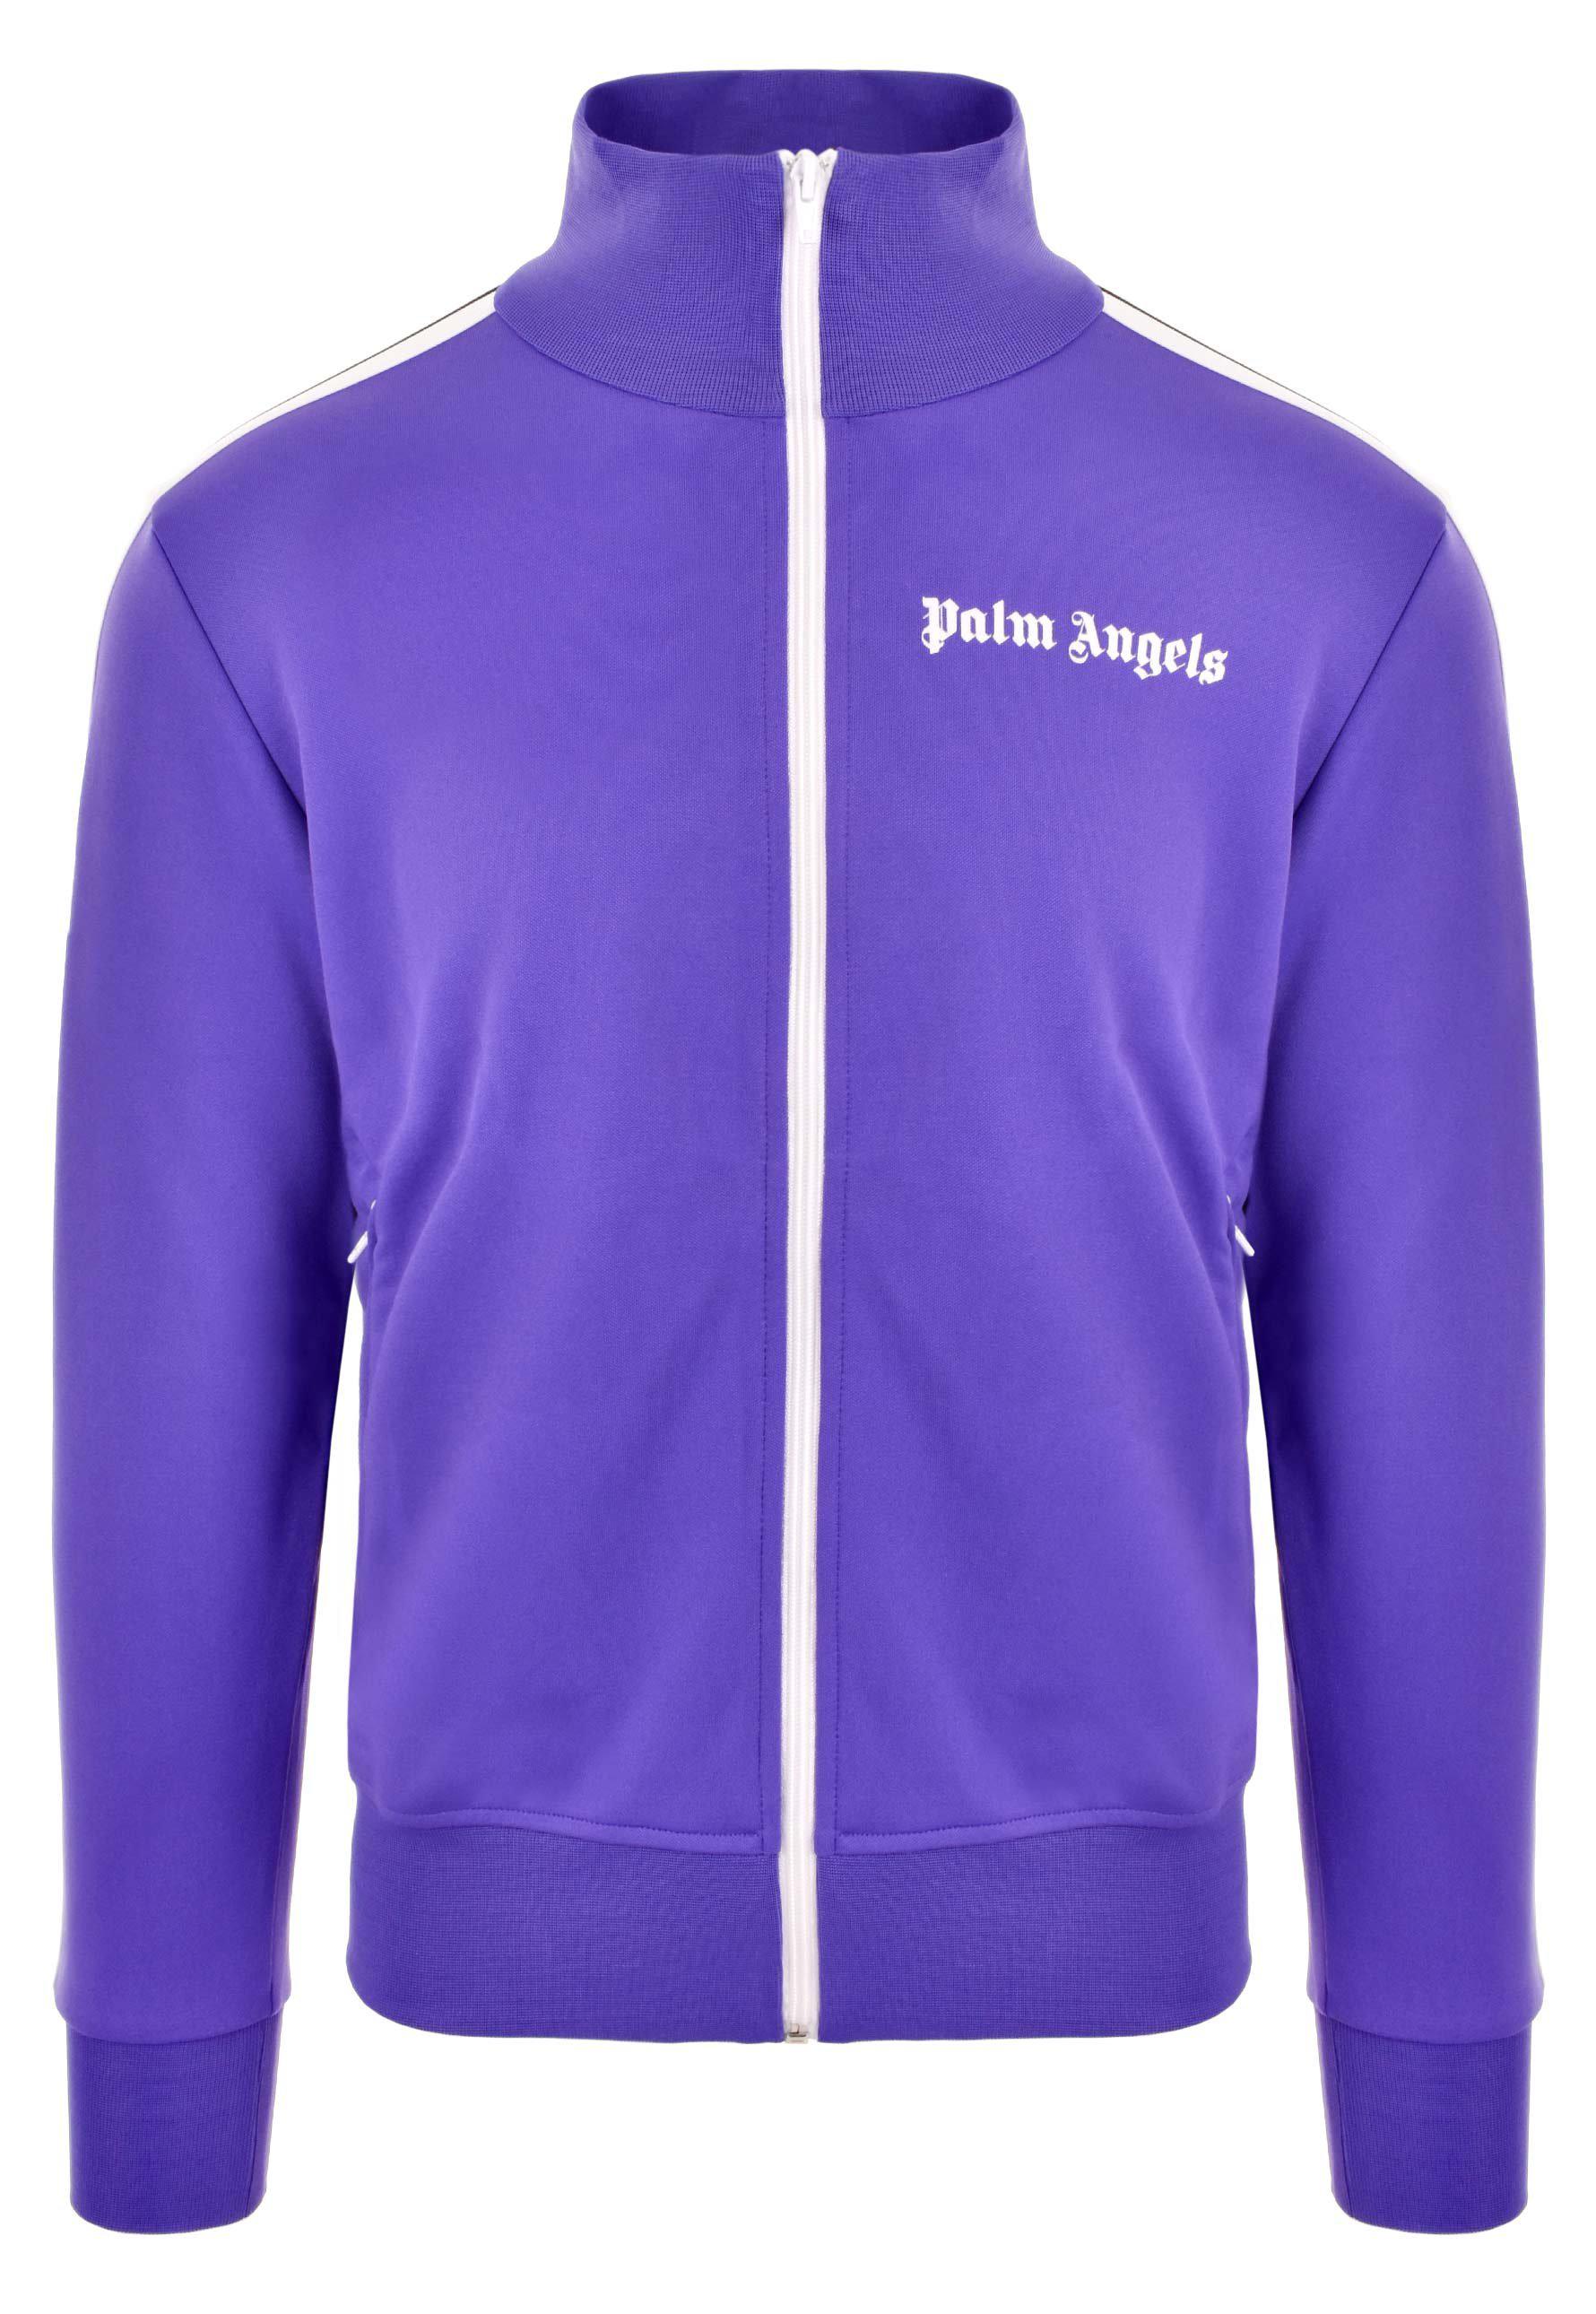 Lyst - Palm Angels Classic Track Jacket Purple/white in Purple for Men